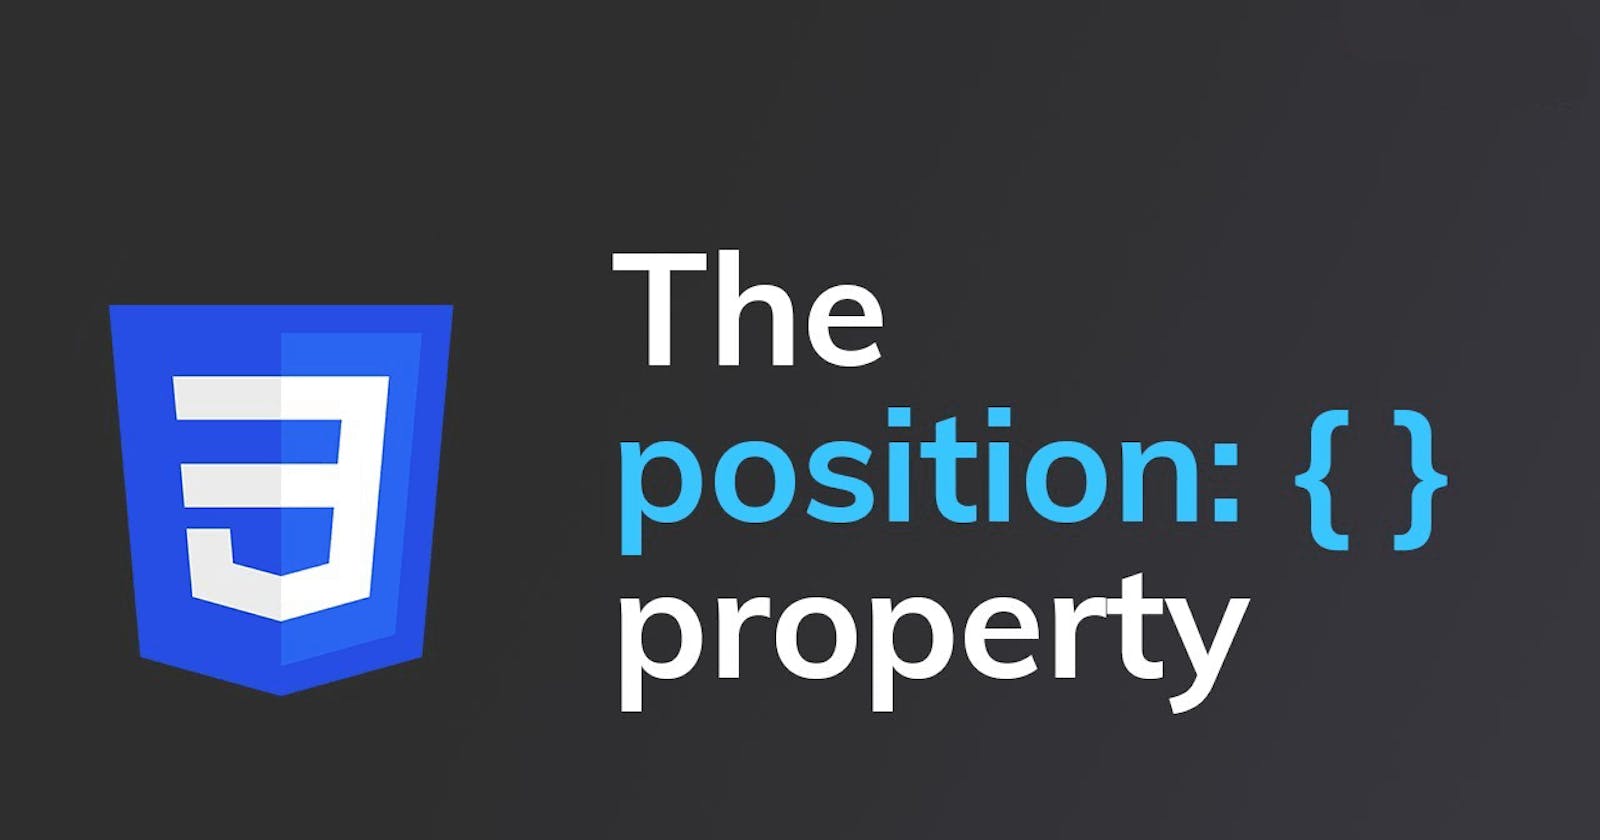 Position Property in Cascading Style Sheets